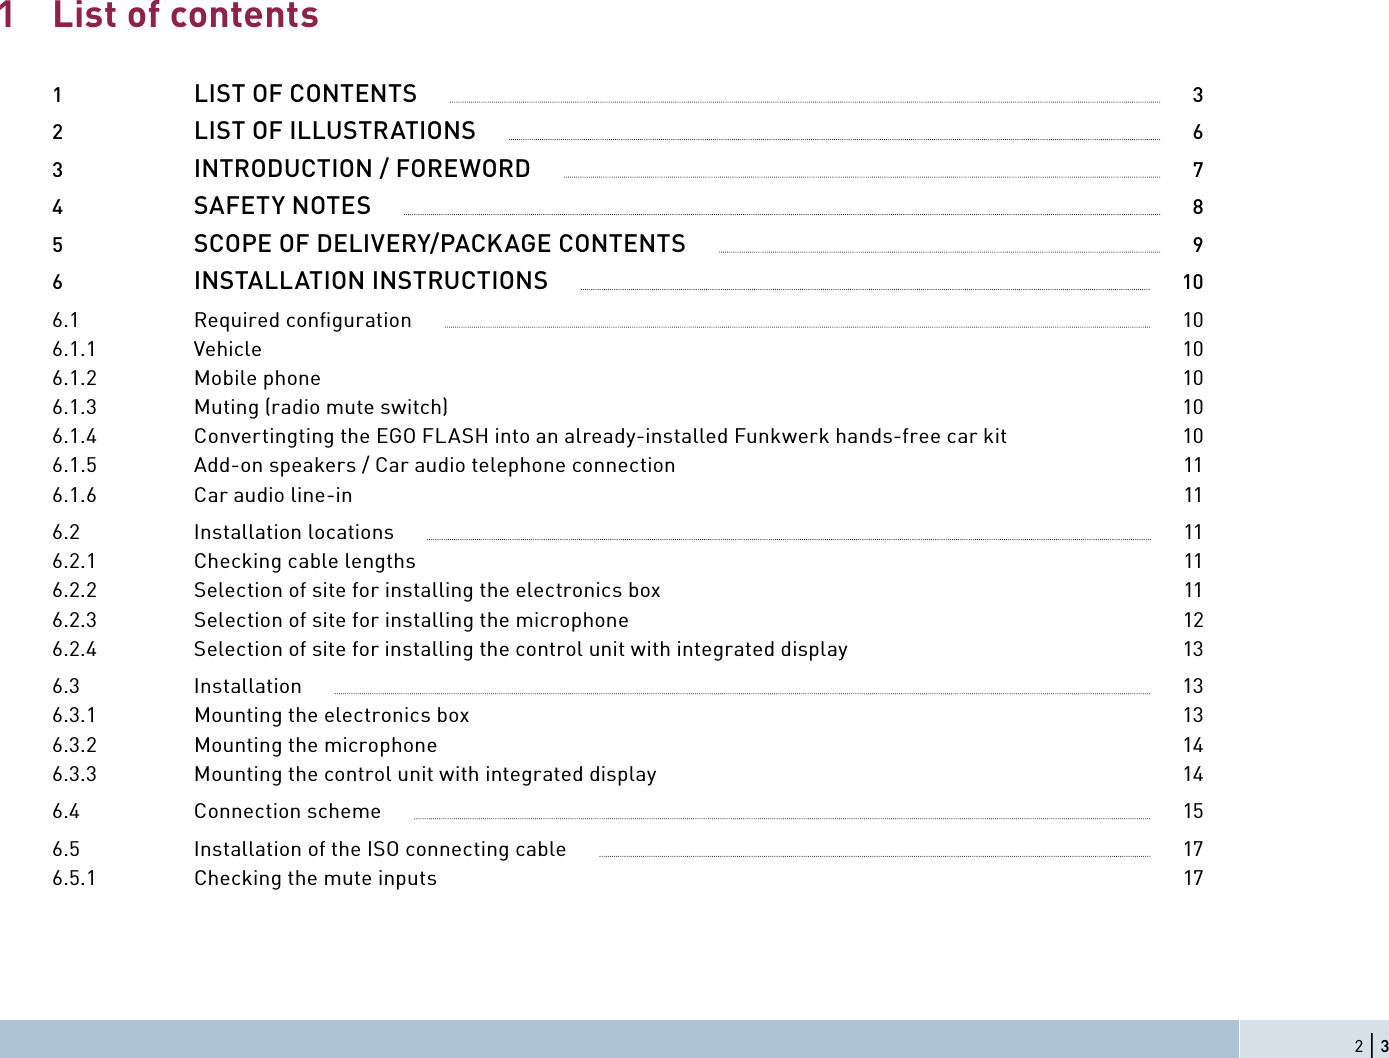 List of contents1  LIST OF CONTENTS              32  LIST OF ILLUSTRATIONS              63  INTRODUCTION / FOREWORD              74  SAFETY NOTES              85  SCOPE OF DELIVERY/PACKAGE CONTENTS              96  INSTALLATION INSTRUCTIONS              106.1 Required conﬁ guration              106.1.1 Vehicle  106.1.2 Mobile phone  106.1.3  Muting (radio mute switch)  106.1.4  Convertingting the EGO FLASH into an already-installed Funkwerk hands-free car kit  106.1.5  Add-on speakers / Car audio telephone connection  116.1.6  Car audio line-in  116.2  Installation locations              116.2.1  Checking cable lengths  116.2.2  Selection of site for installing the electronics box  116.2.3  Selection of site for installing the microphone  126.2.4  Selection of site for installing the control unit with integrated display  136.3  Installation              136.3.1  Mounting the electronics box  136.3.2  Mounting the microphone  146.3.3  Mounting the control unit with integrated display  146.4  Connection scheme              156.5  Installation of the ISO connecting cable              176.5.1  Checking the mute inputs  1712 | 3